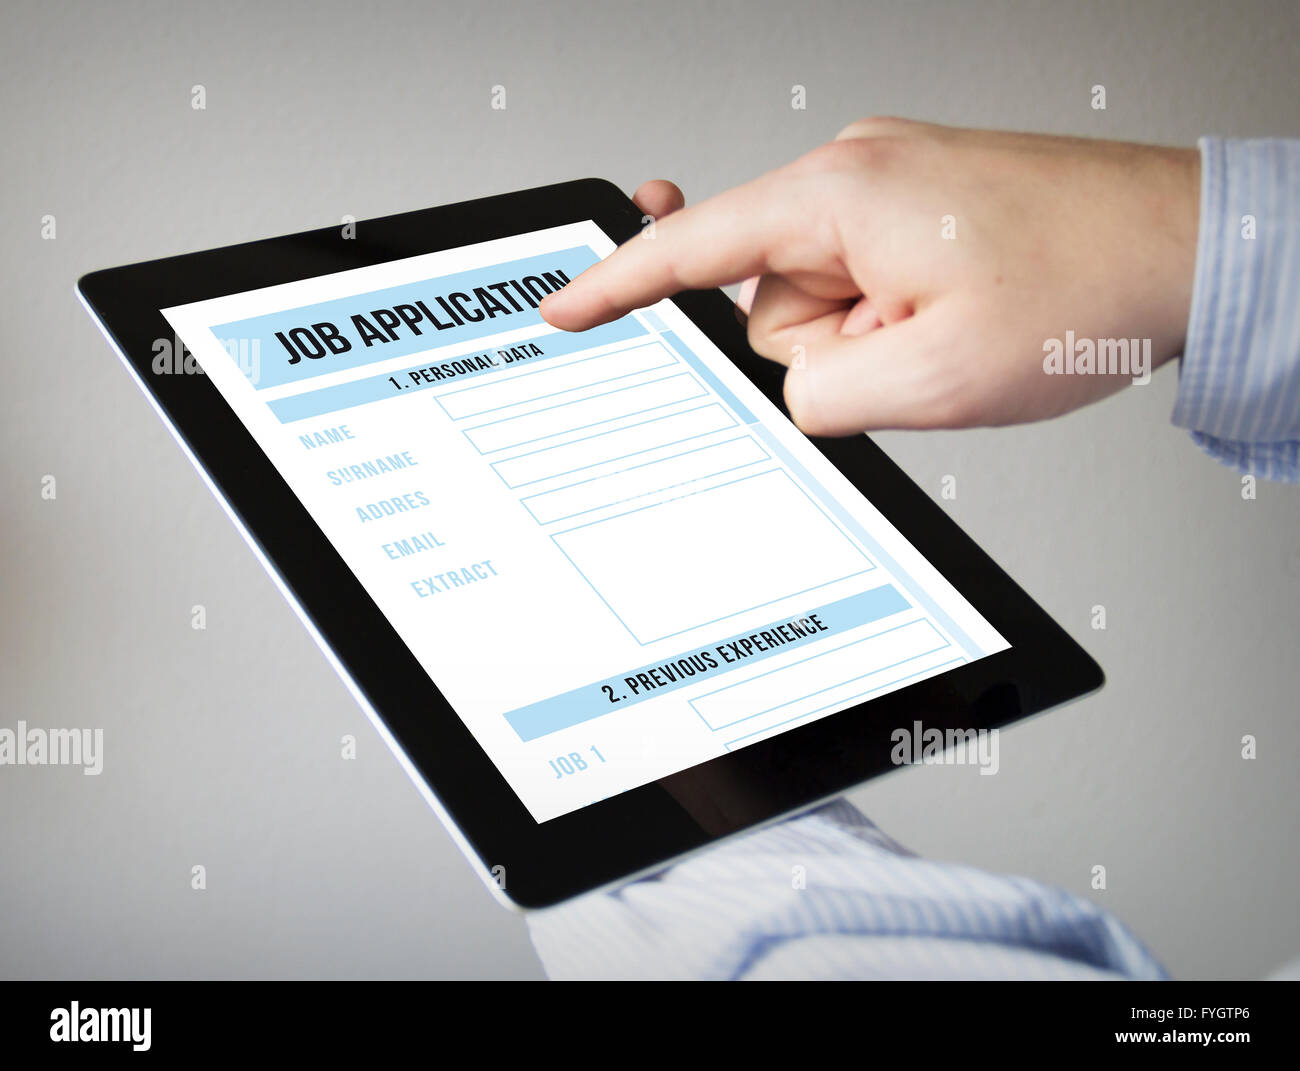 new technologies concept: hands with touchscreen tablet with job application form Stock Photo